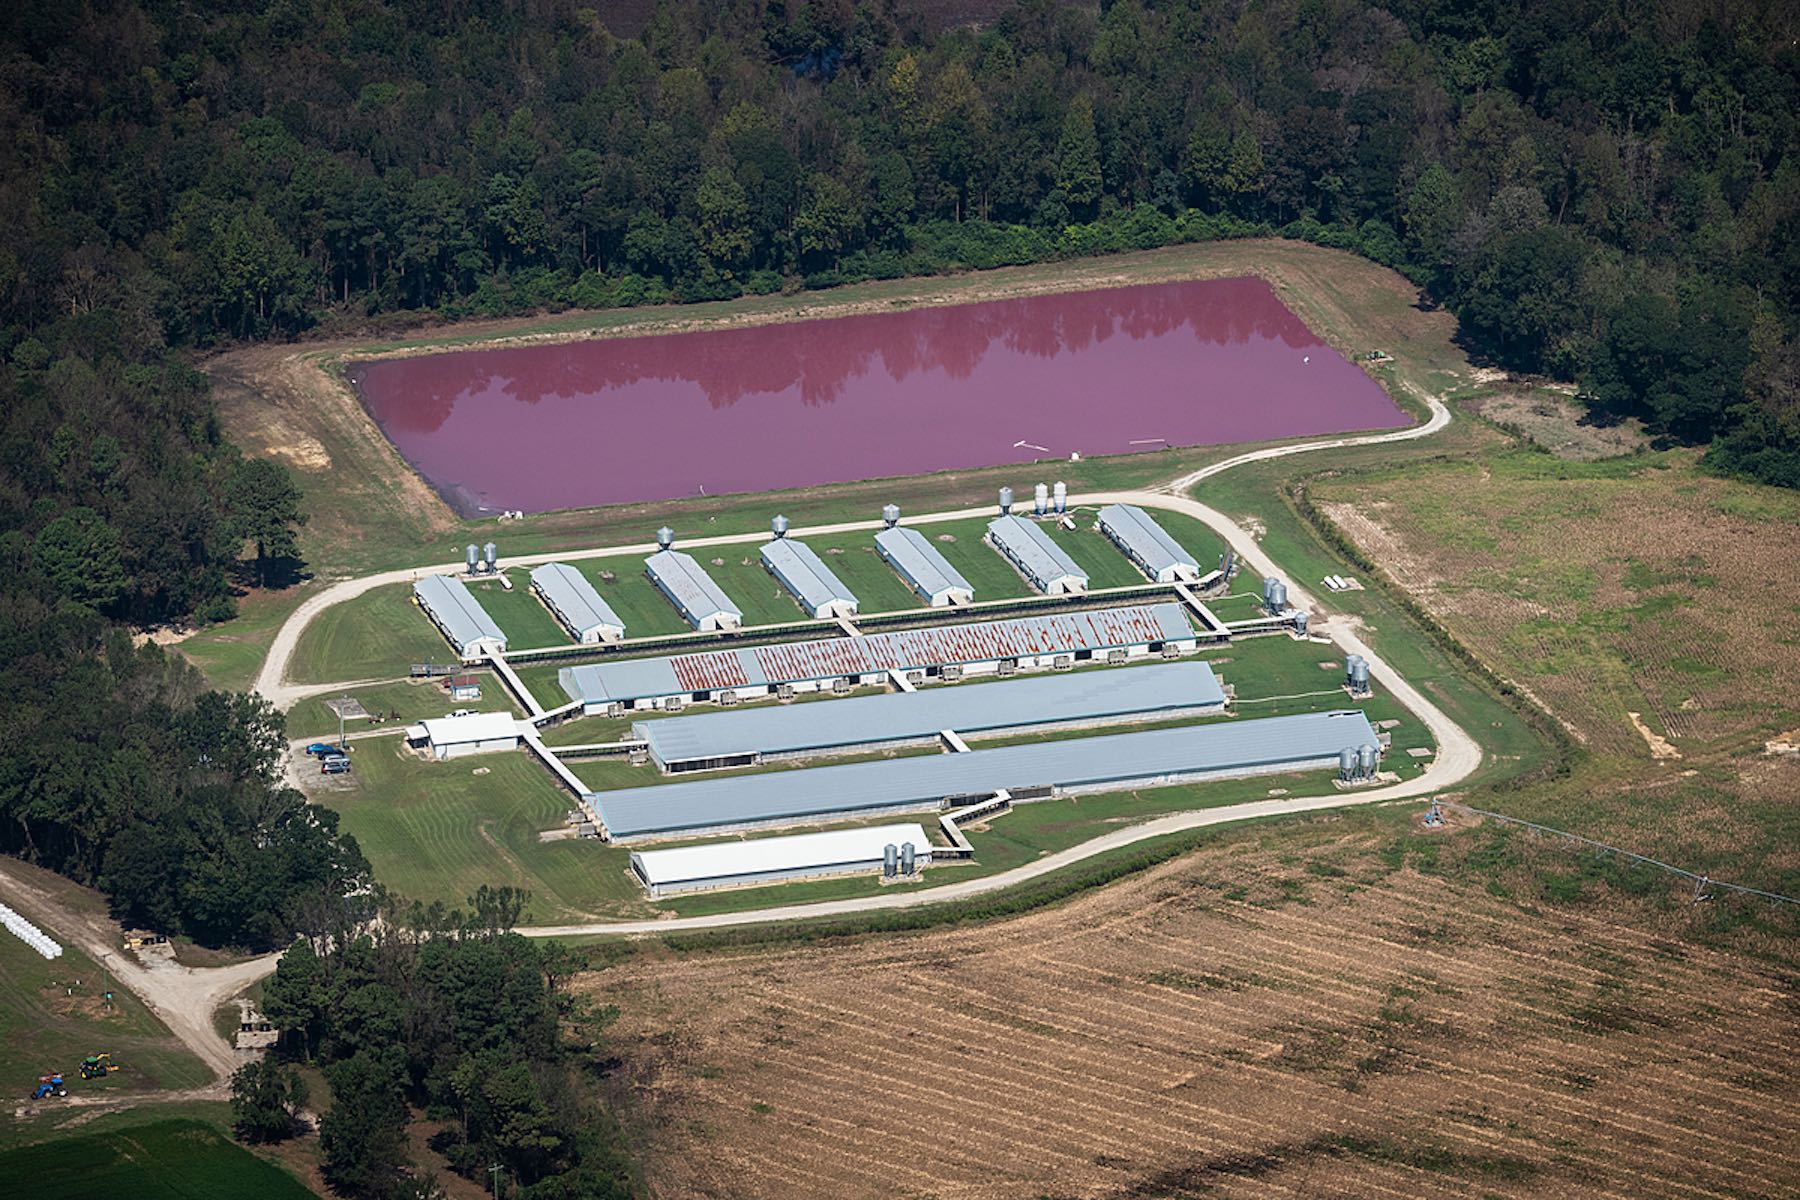 Aerial views of flooded CAFO (Concentrated Animal Feeding Operations) farms in North Carolina, USA. Chicken, turkey and pig farms were widely affected by the flooding caused by Hurricane Florence. We Animals Media contributors travelled to North Carolina to document the aftermath of Hurricane Florence, which caused the death of at least 5.5 million farmed animals and widespread environmental devastation from breaches in toxic manure lagoons.